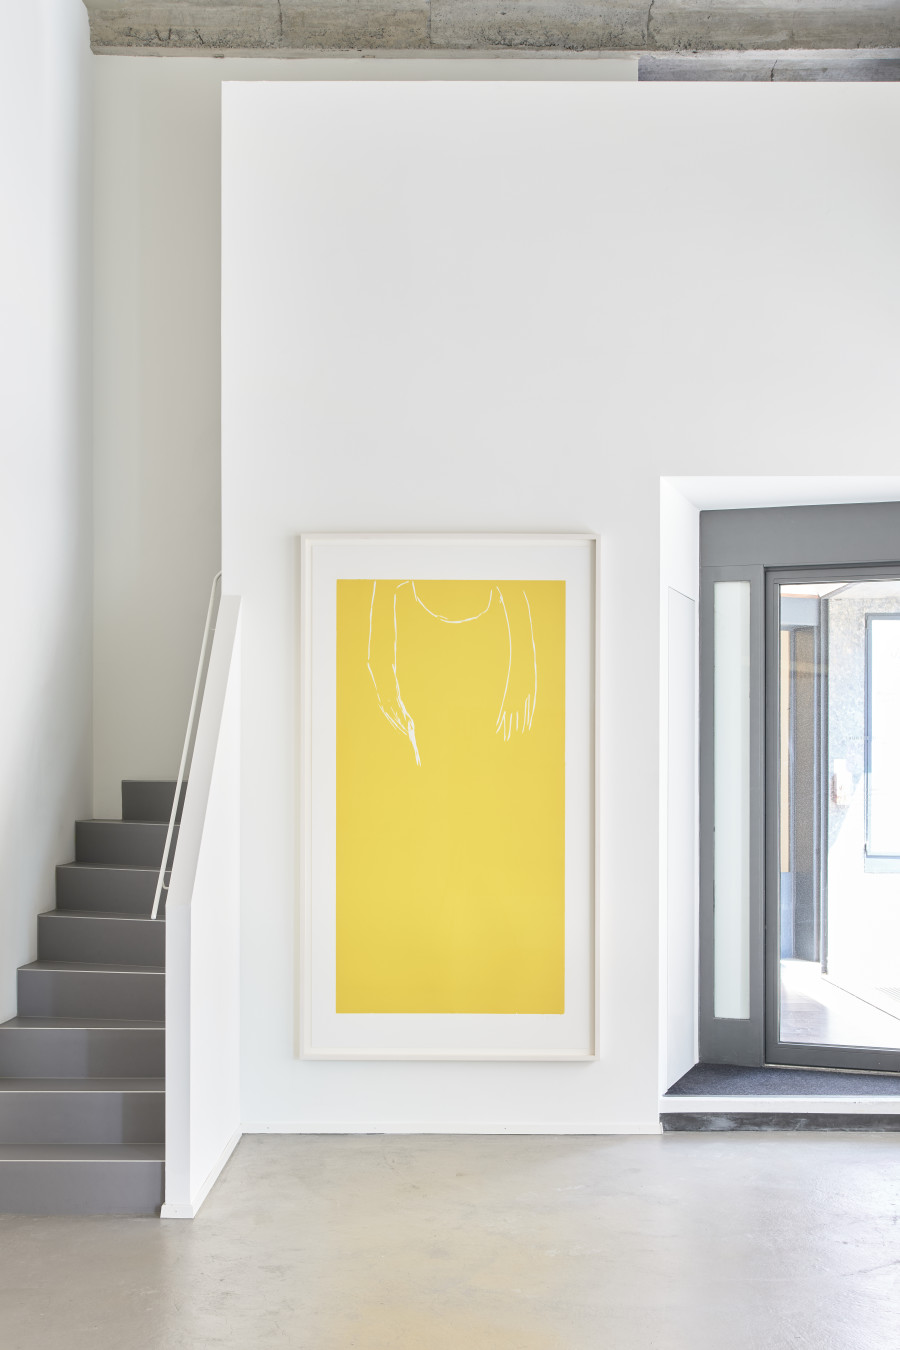 Andrea Büttner, Erntender, 2021, woodcut on paper, 217.5 x 124 cm (framed), unique in color. Photo: Max Ehrengruber, Courtesy of the artist and Galerie Tschudi